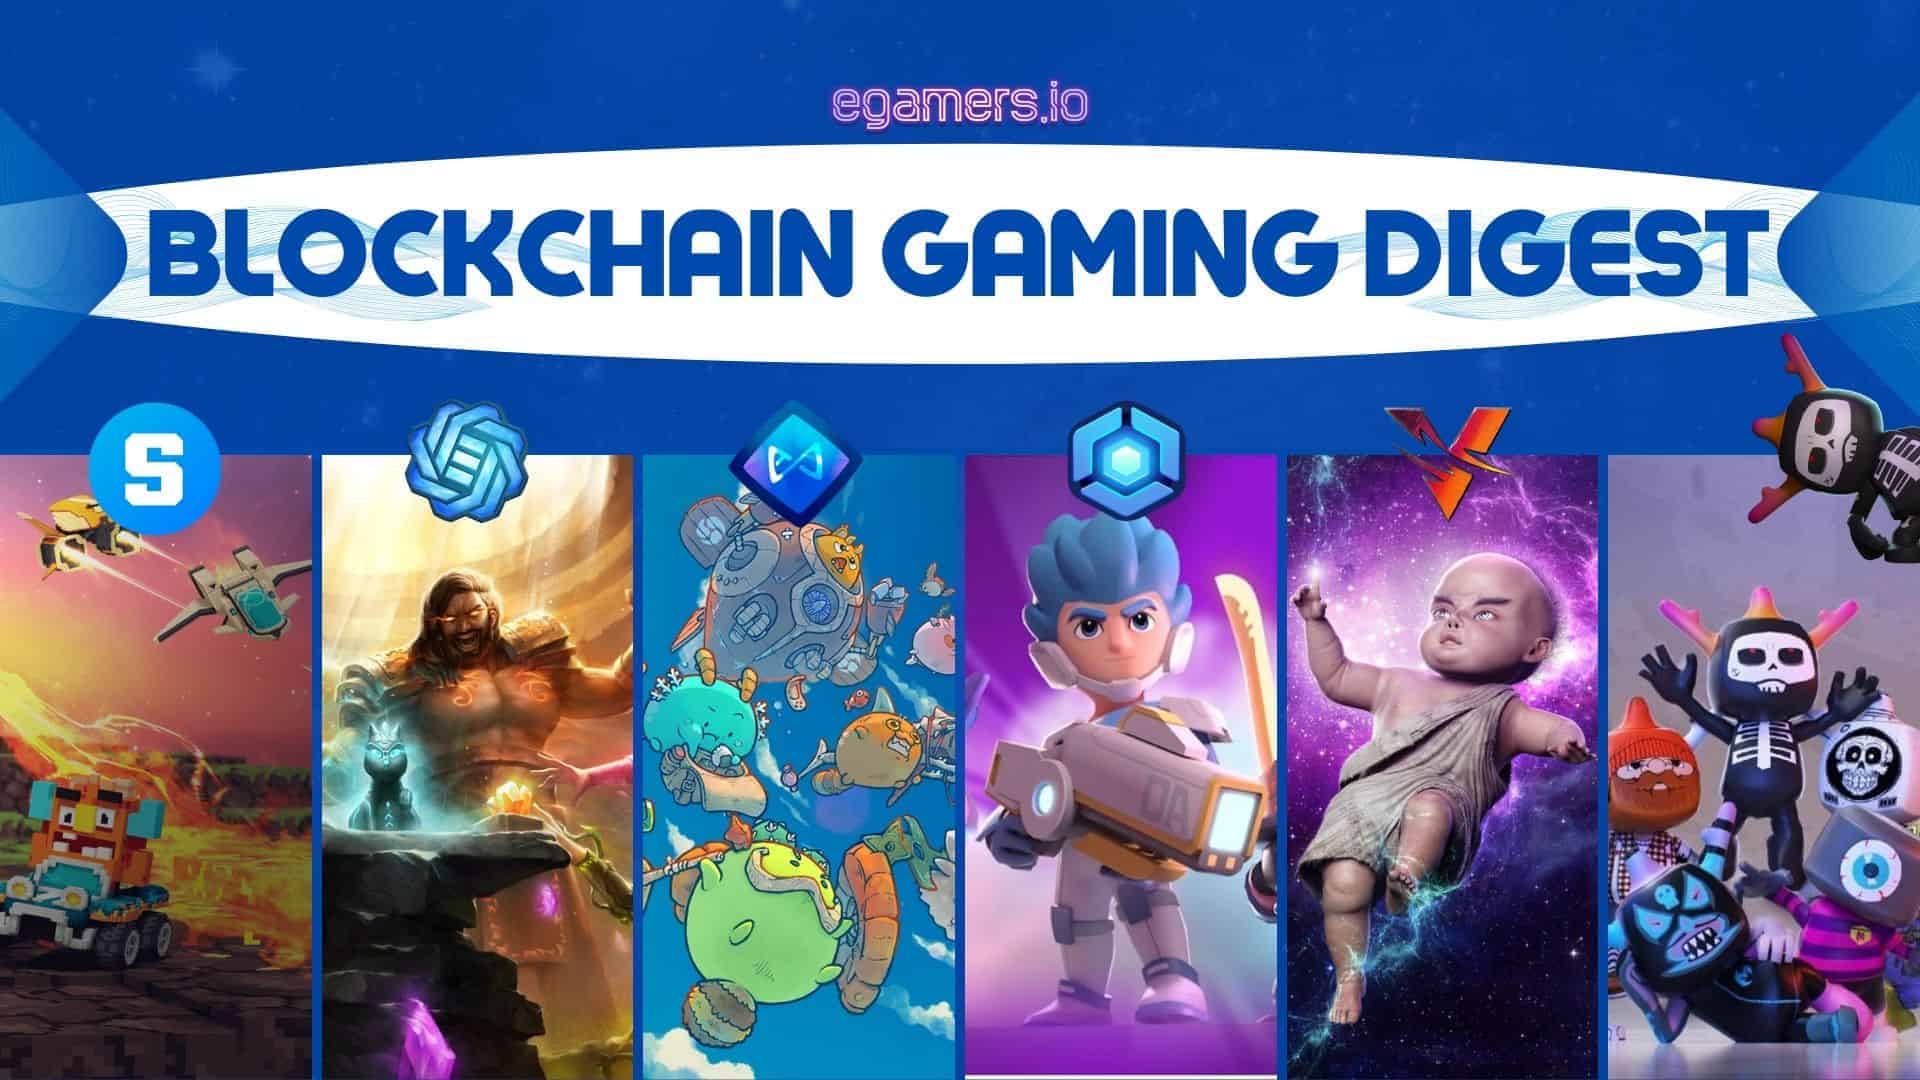 BLOCKCHAIN GAMING DIGEST new Welcome to our Blockchain Gaming Digest Feb. 8-14/2021.